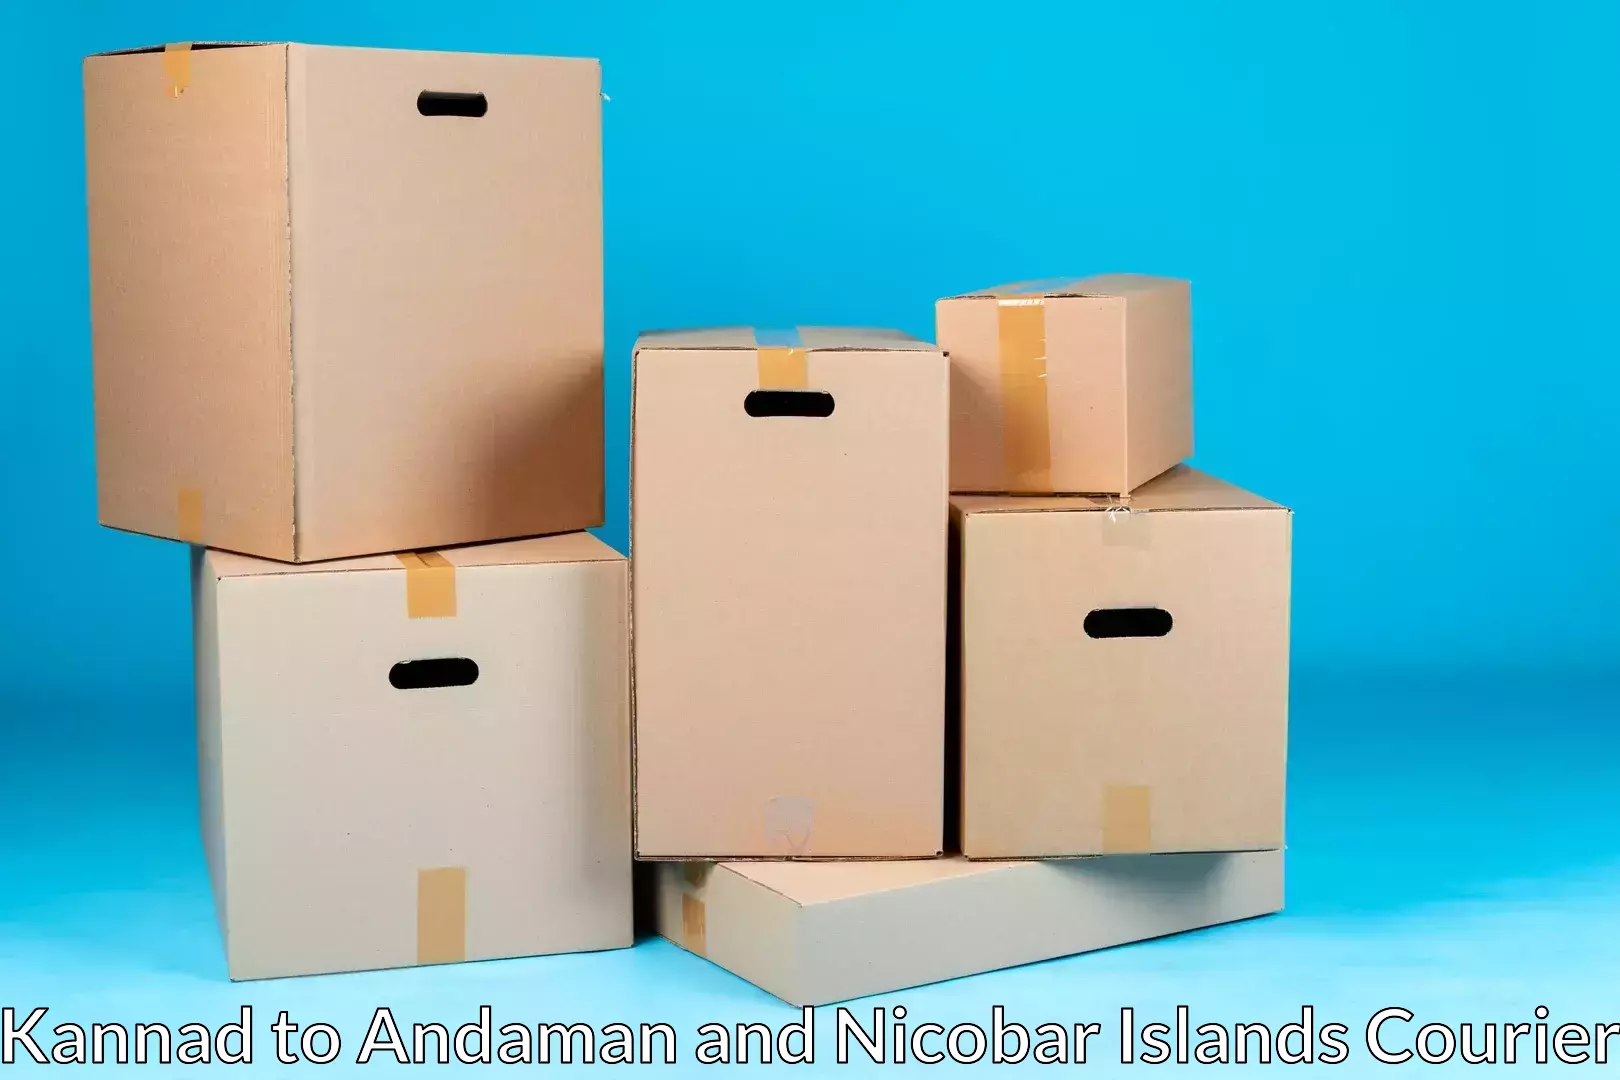 Professional furniture movers Kannad to Andaman and Nicobar Islands